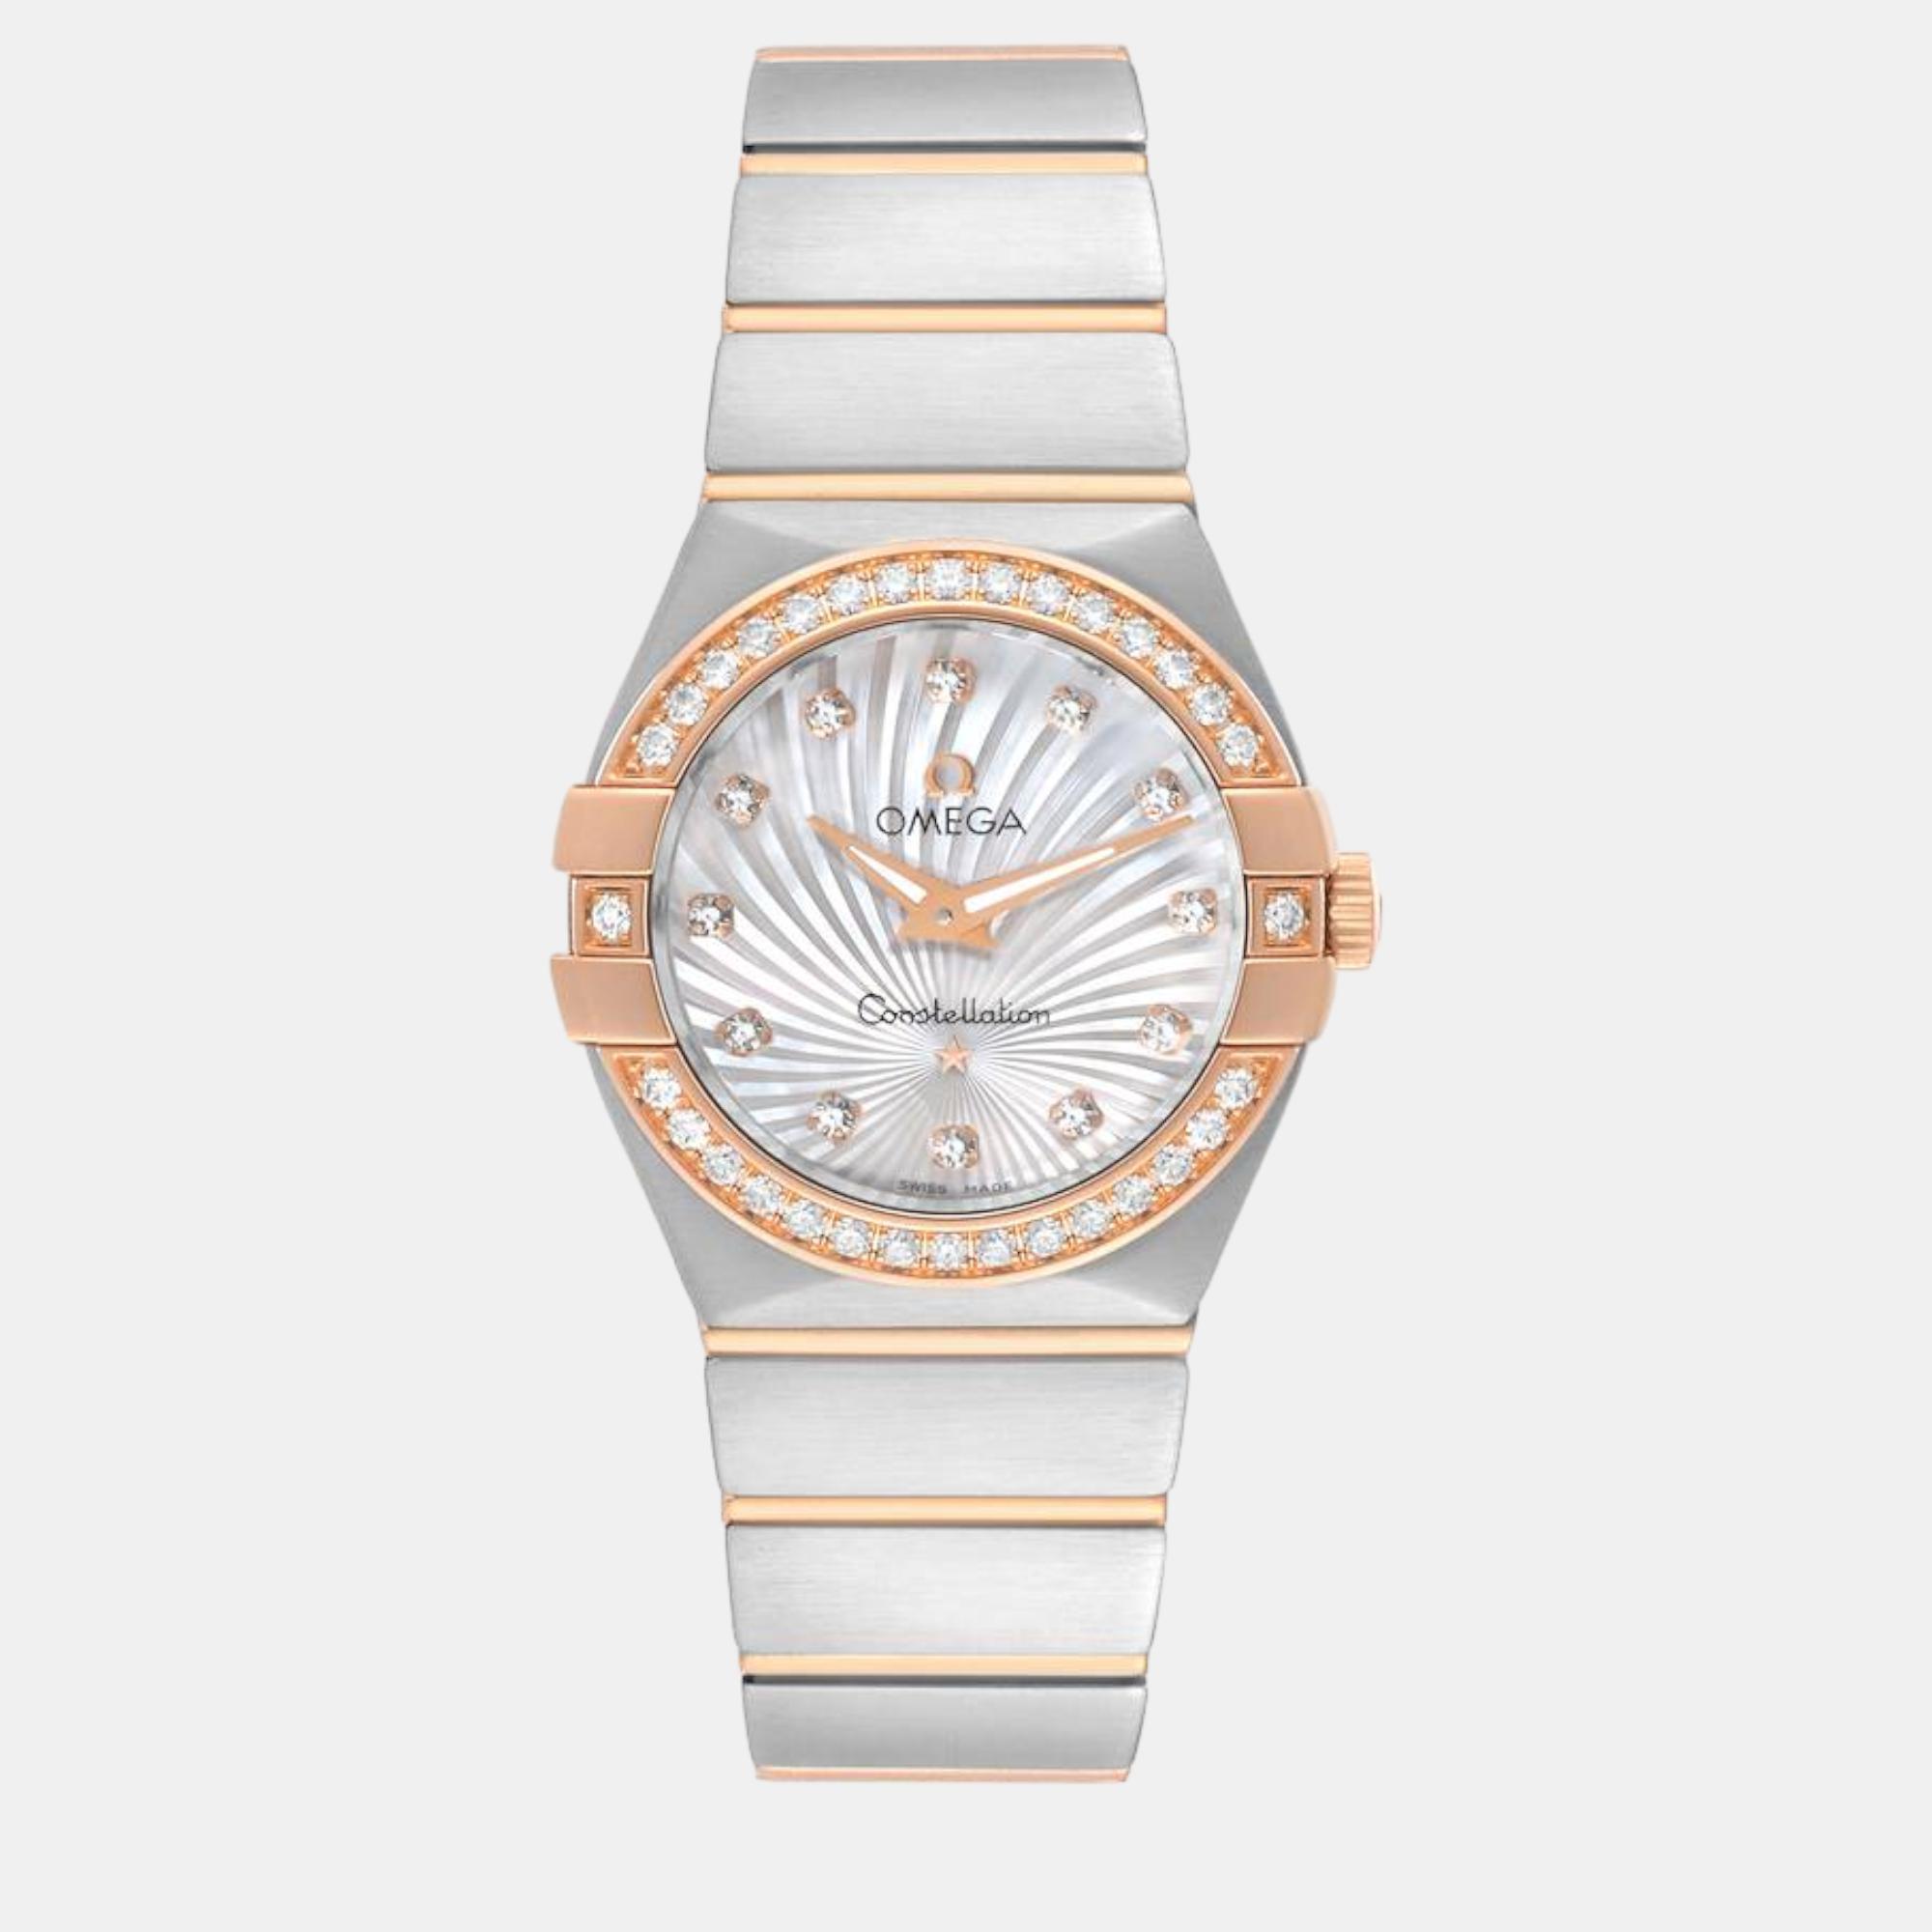 Omega mother of pearl diamond 18k rose gold stainless steel constellation quartz women's wristwatch 27 mm